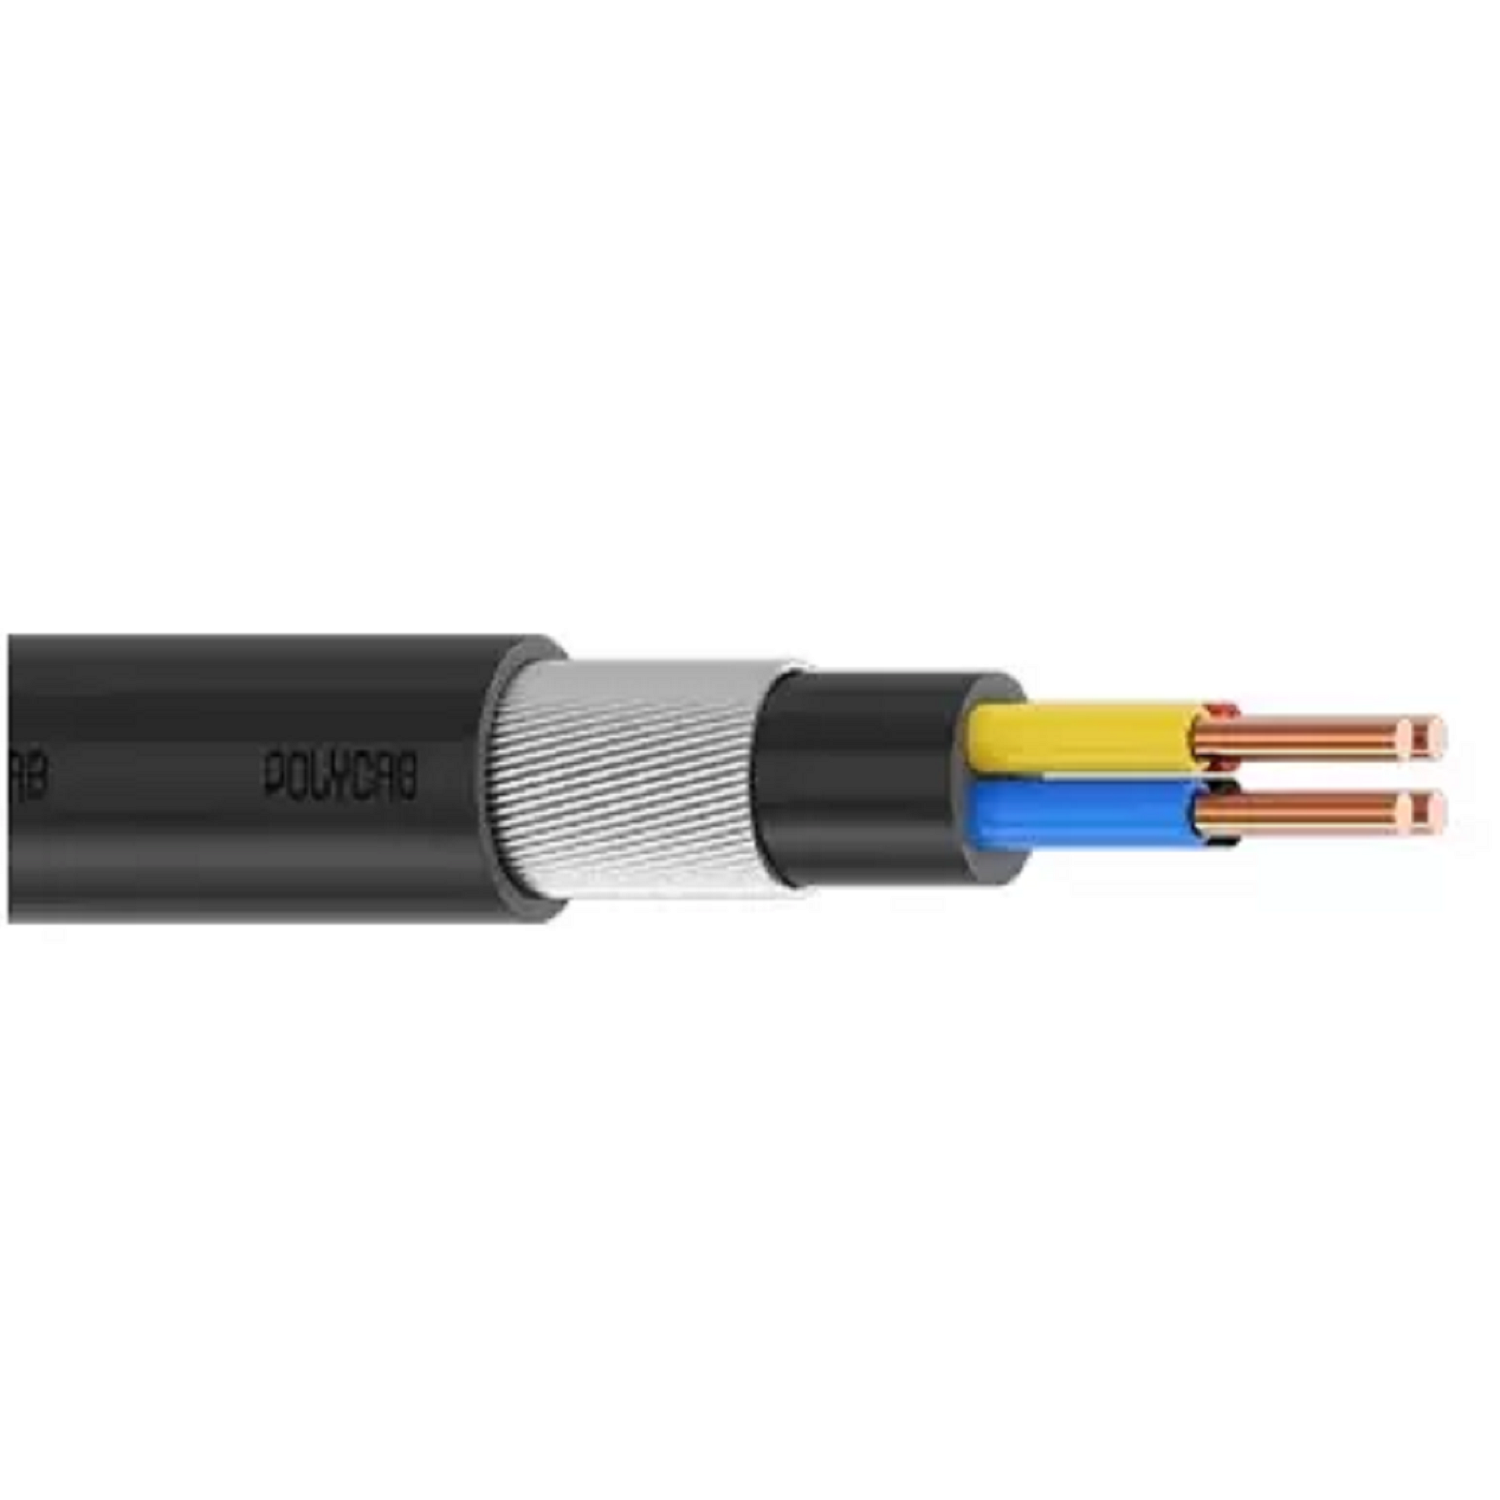 185 Sqmm Polycab Copper Flexible Cable (11 KV) With PVC Insulated Sheathed - Black